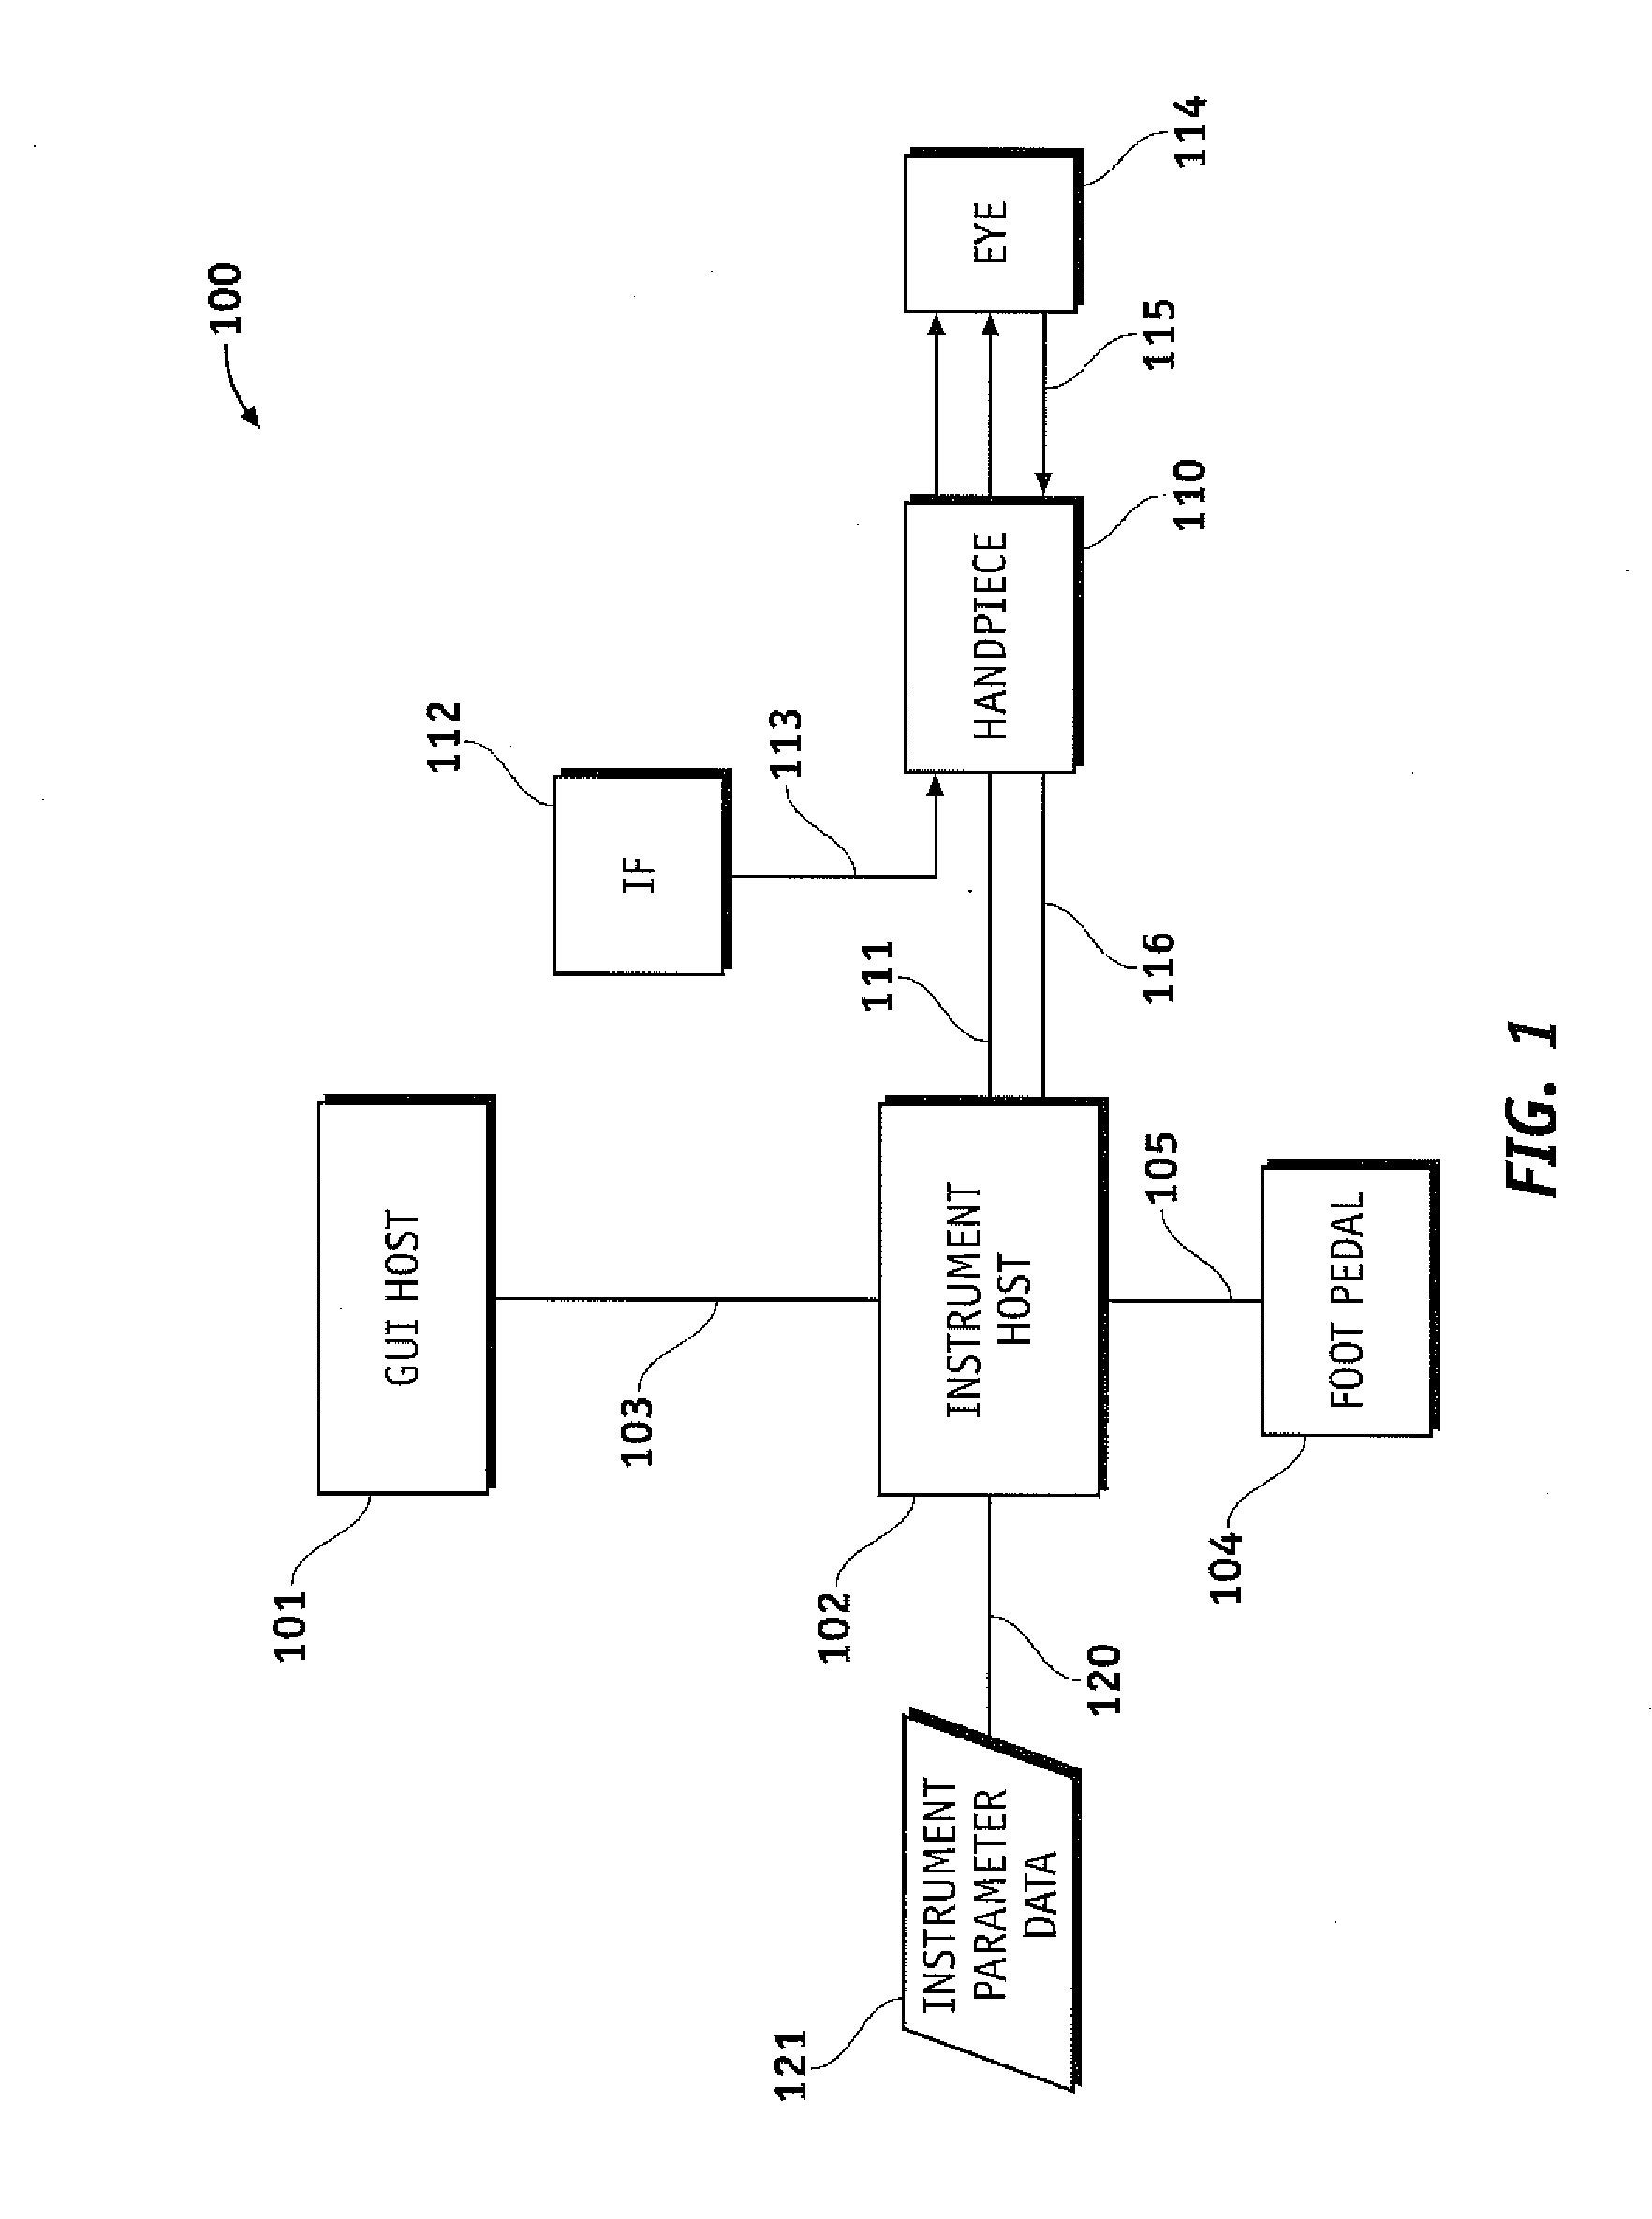 Automatically switching different aspiration levels and/or pumps to an ocular probe